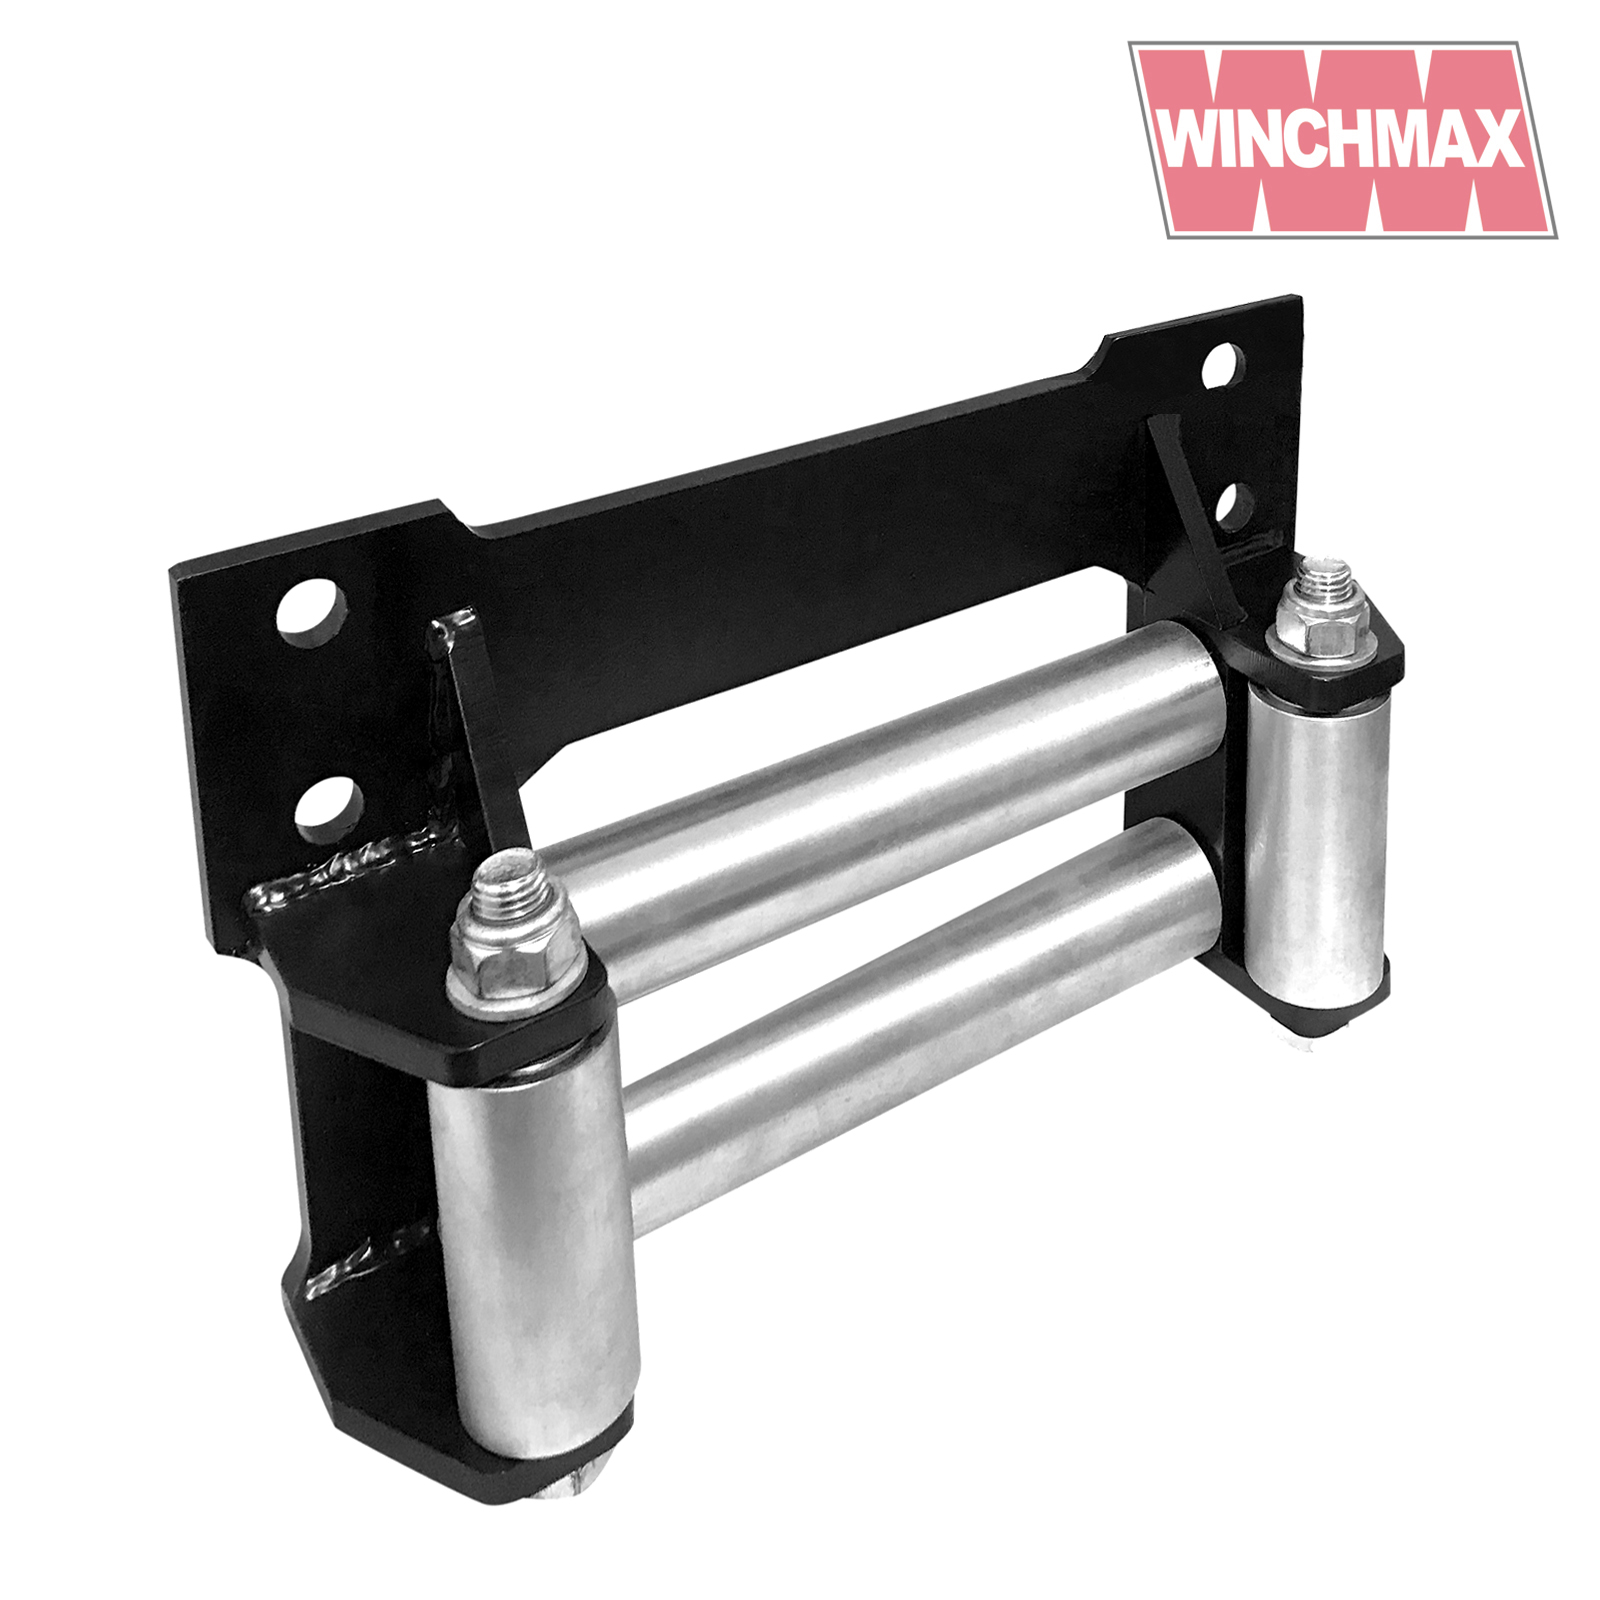 WINCHMAX Heavy Duty Roller Fairlead to fit up to 40000lb Winch